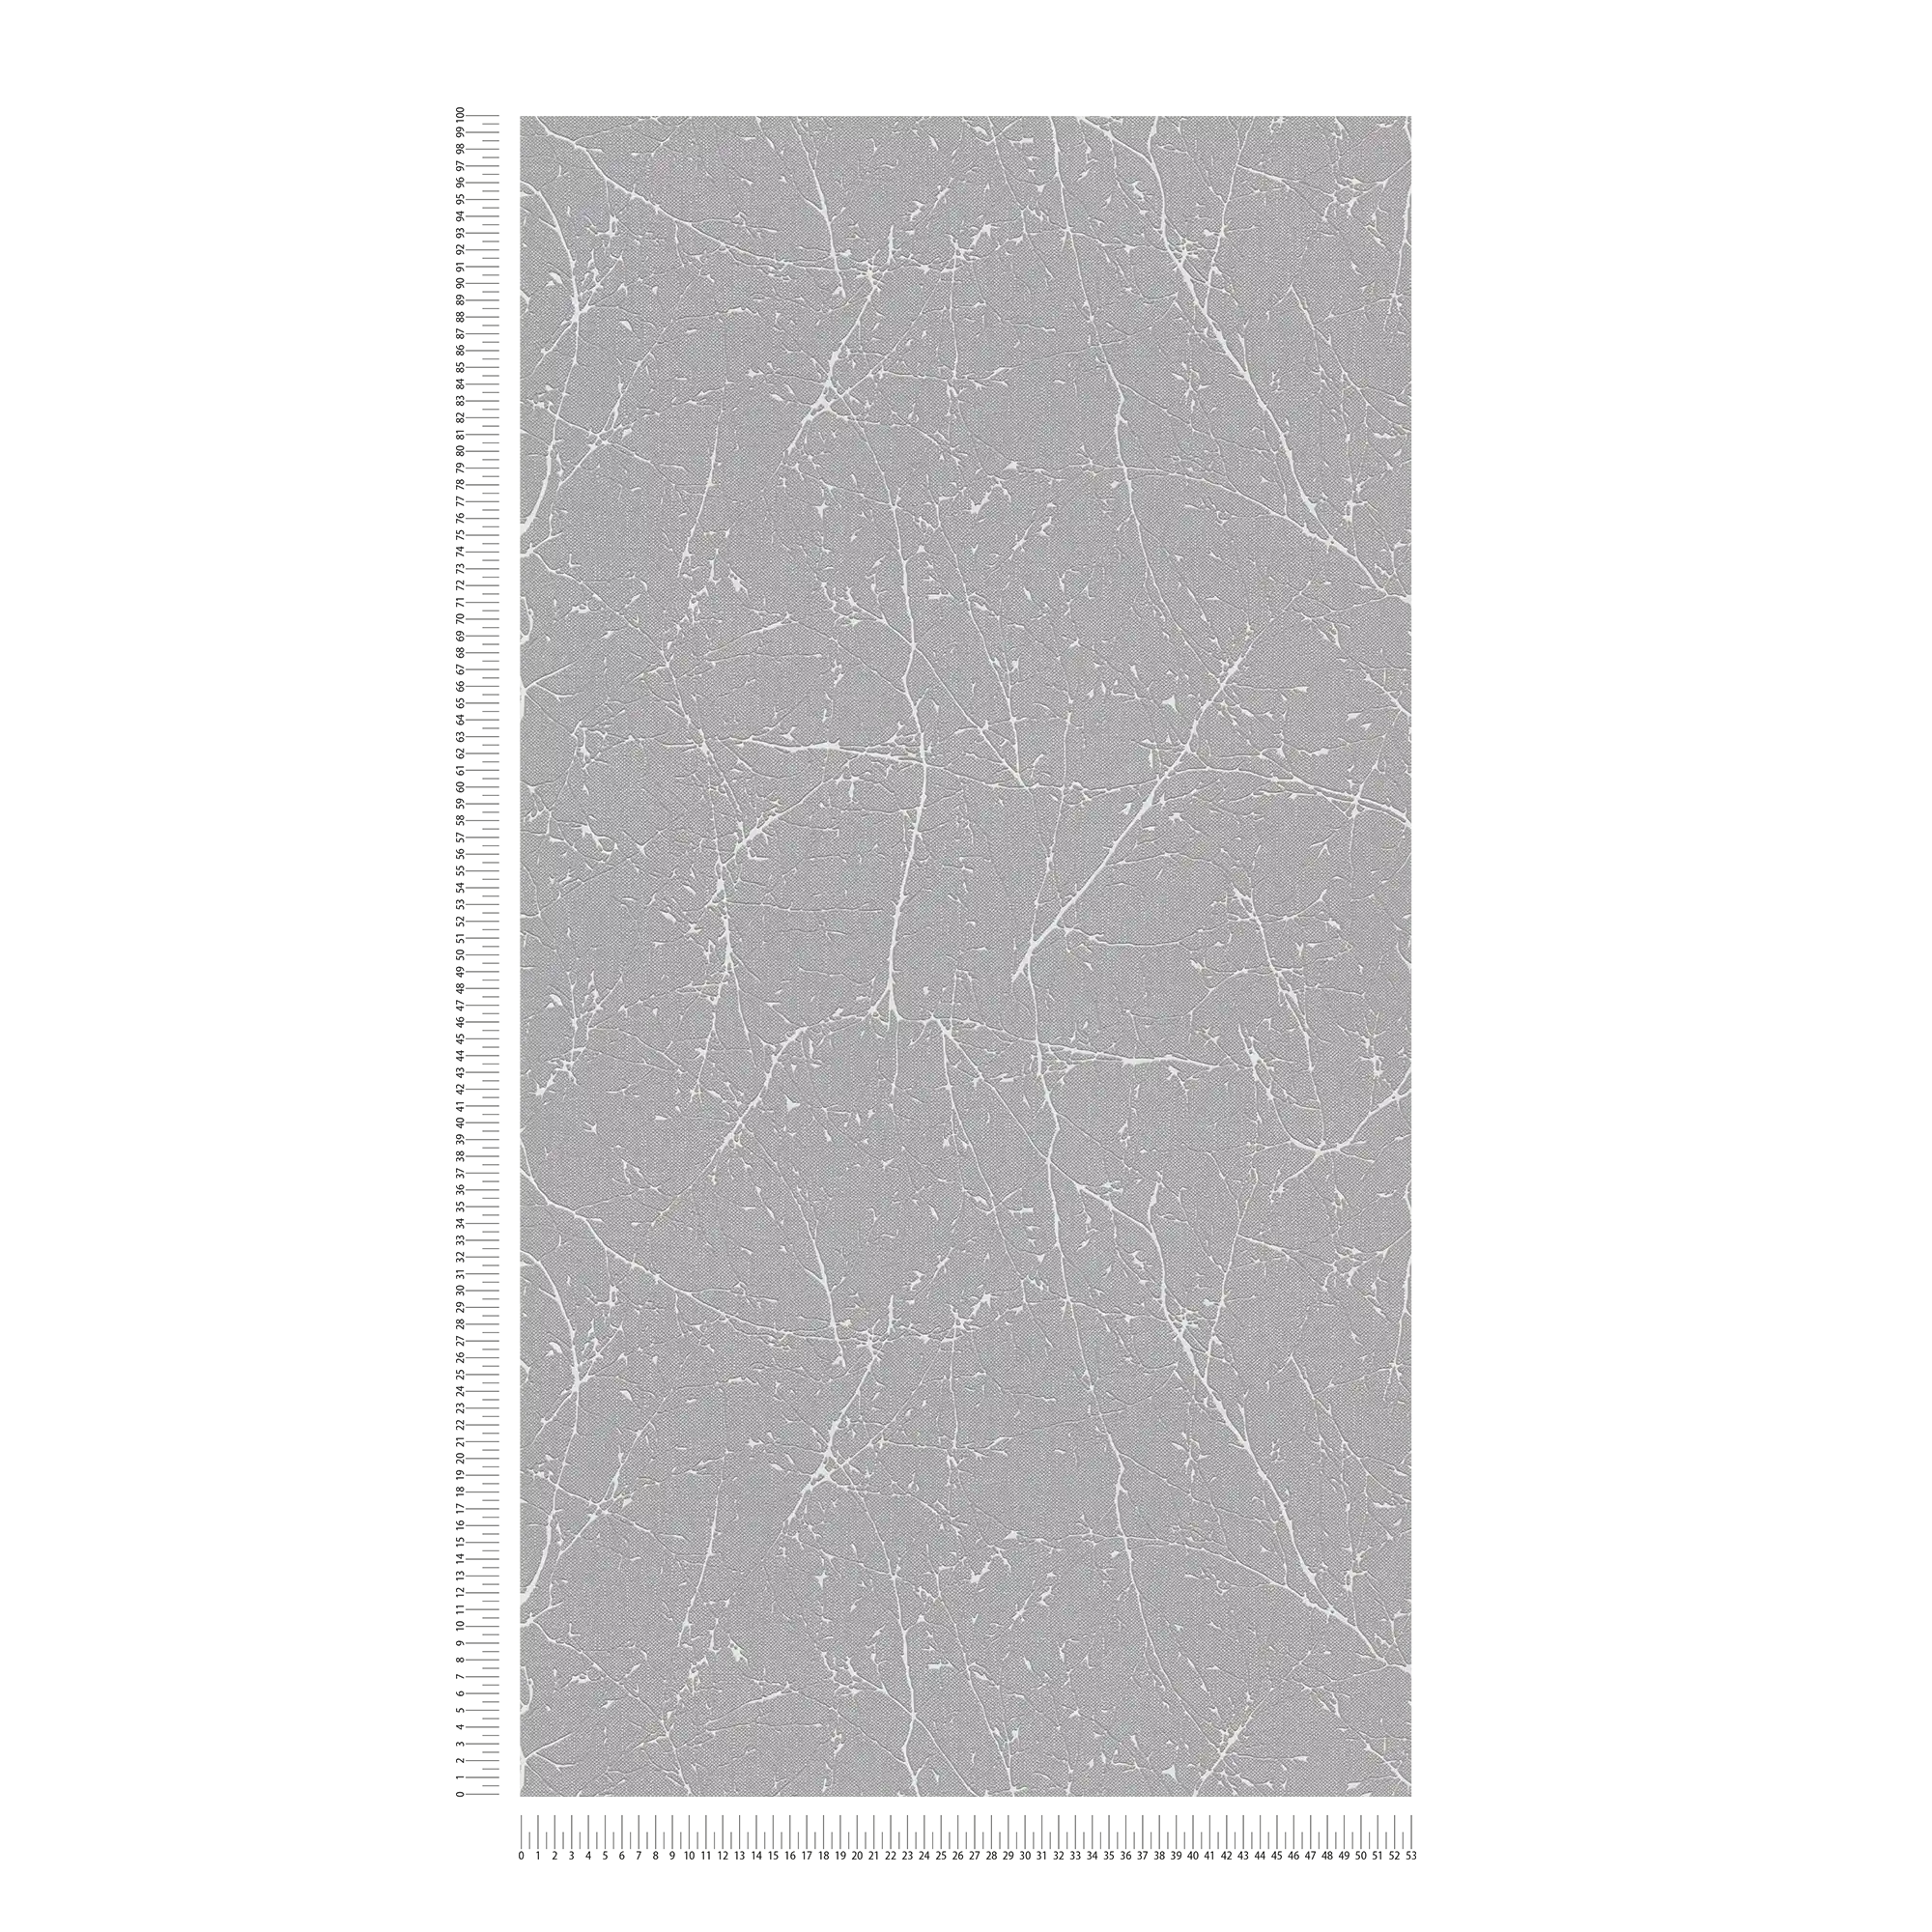             Floral non-woven wallpaper with branch pattern - grey, white
        